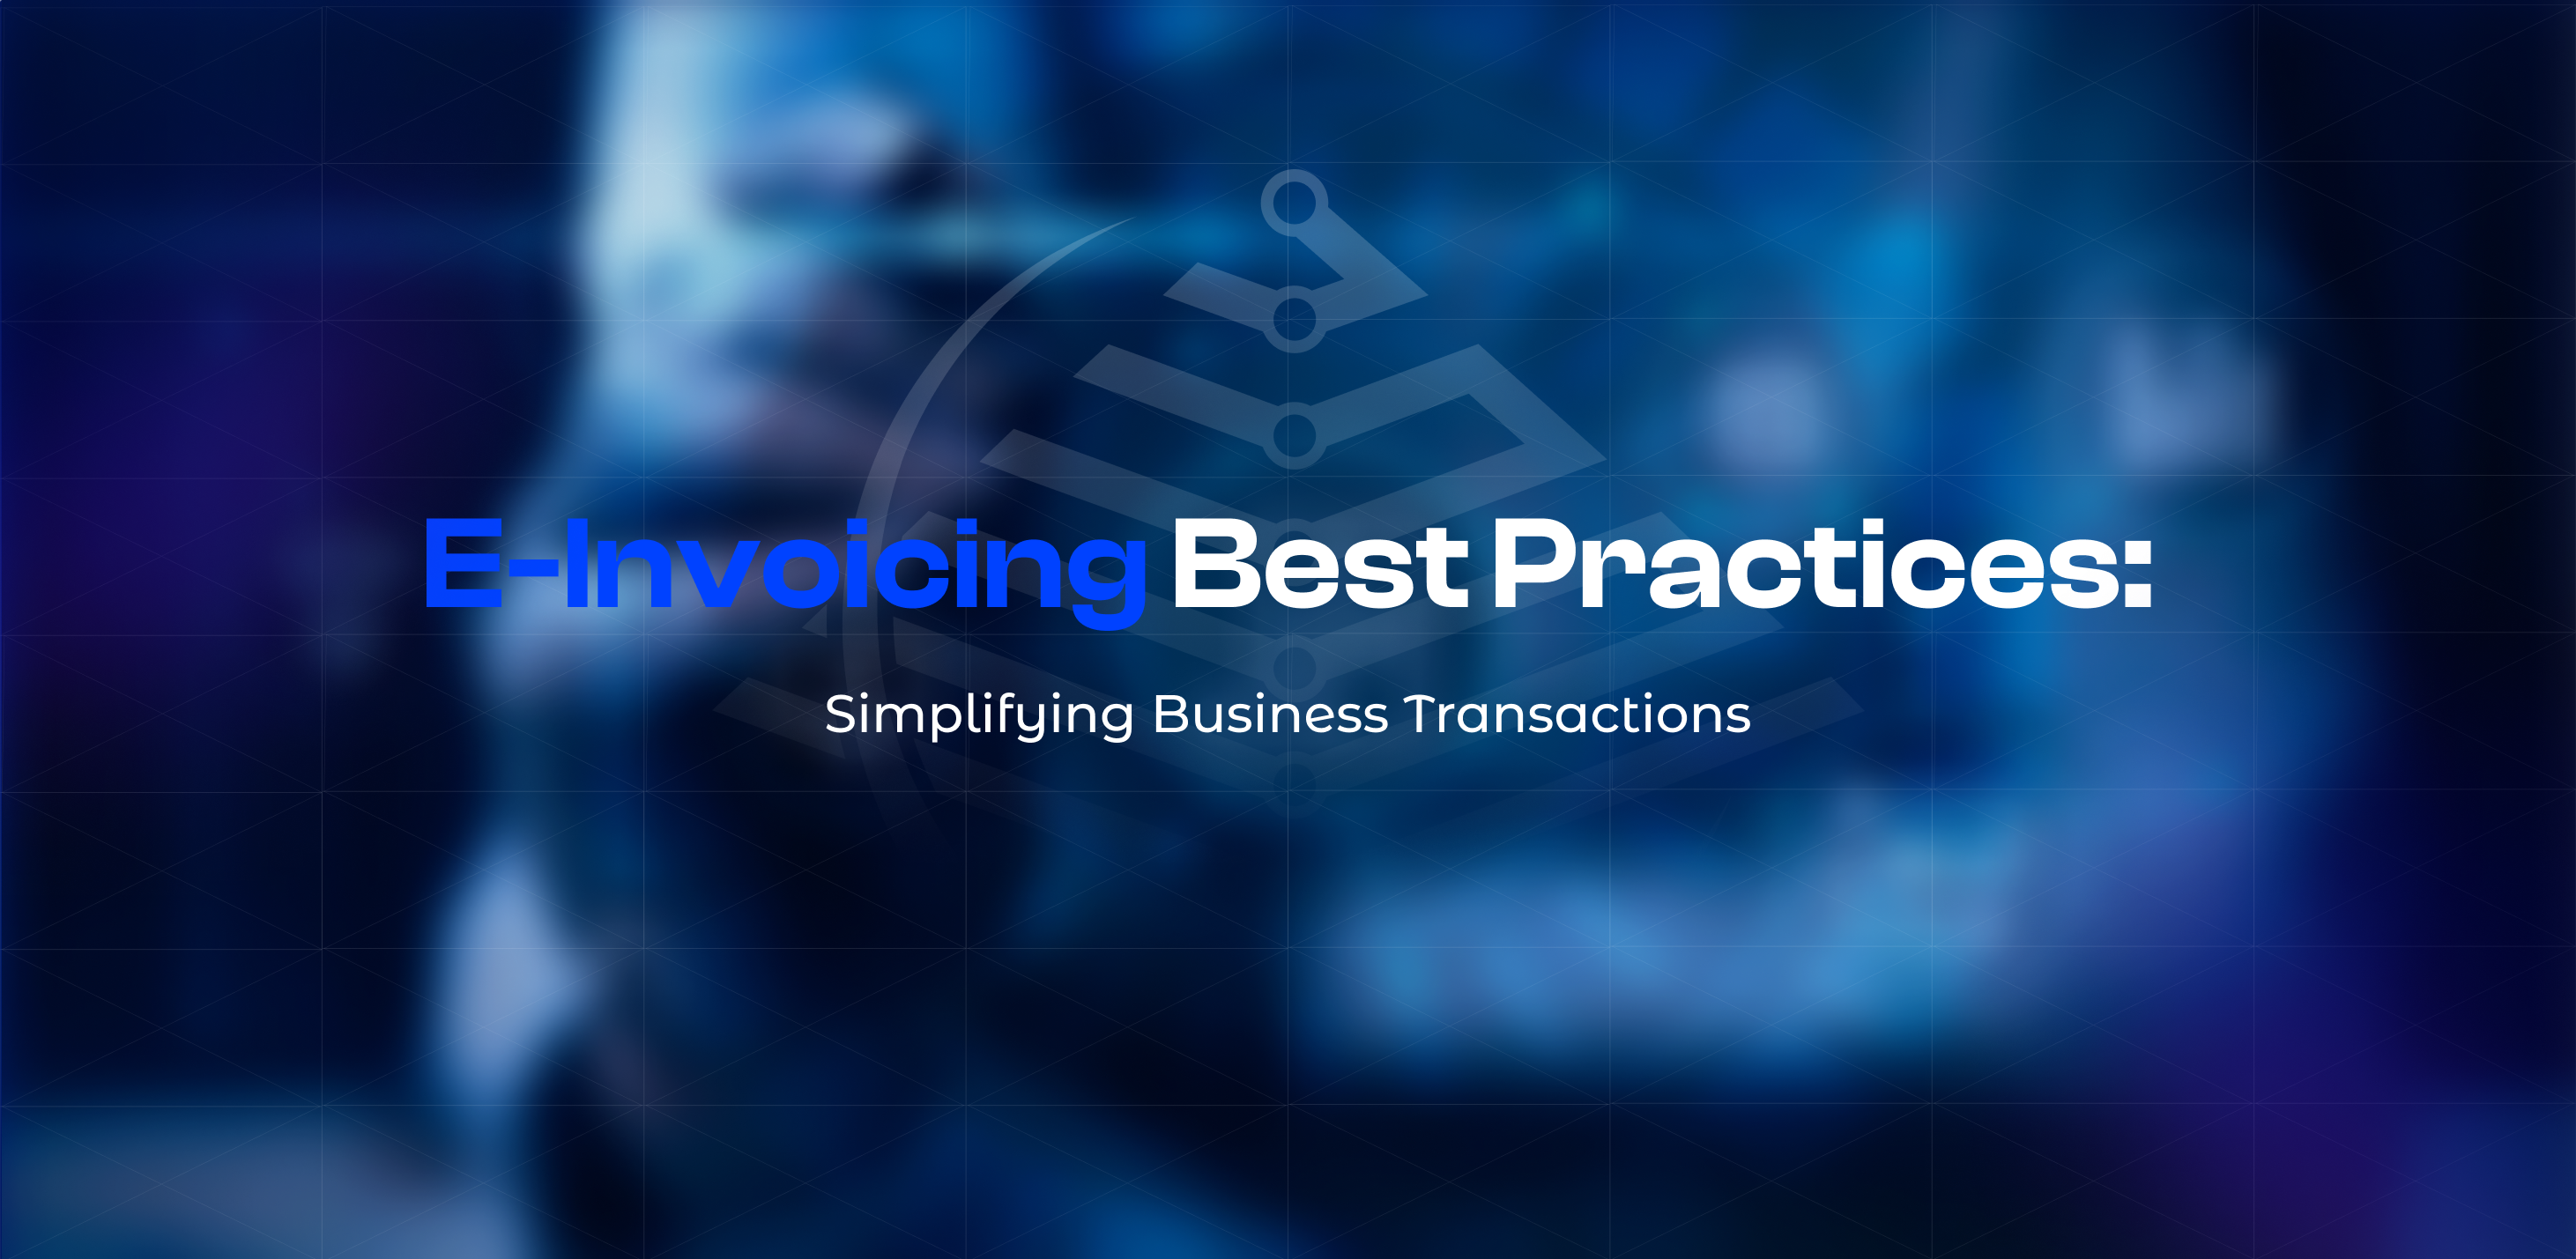 E-Invoicing Best Practices: Simplifying Business Transactions